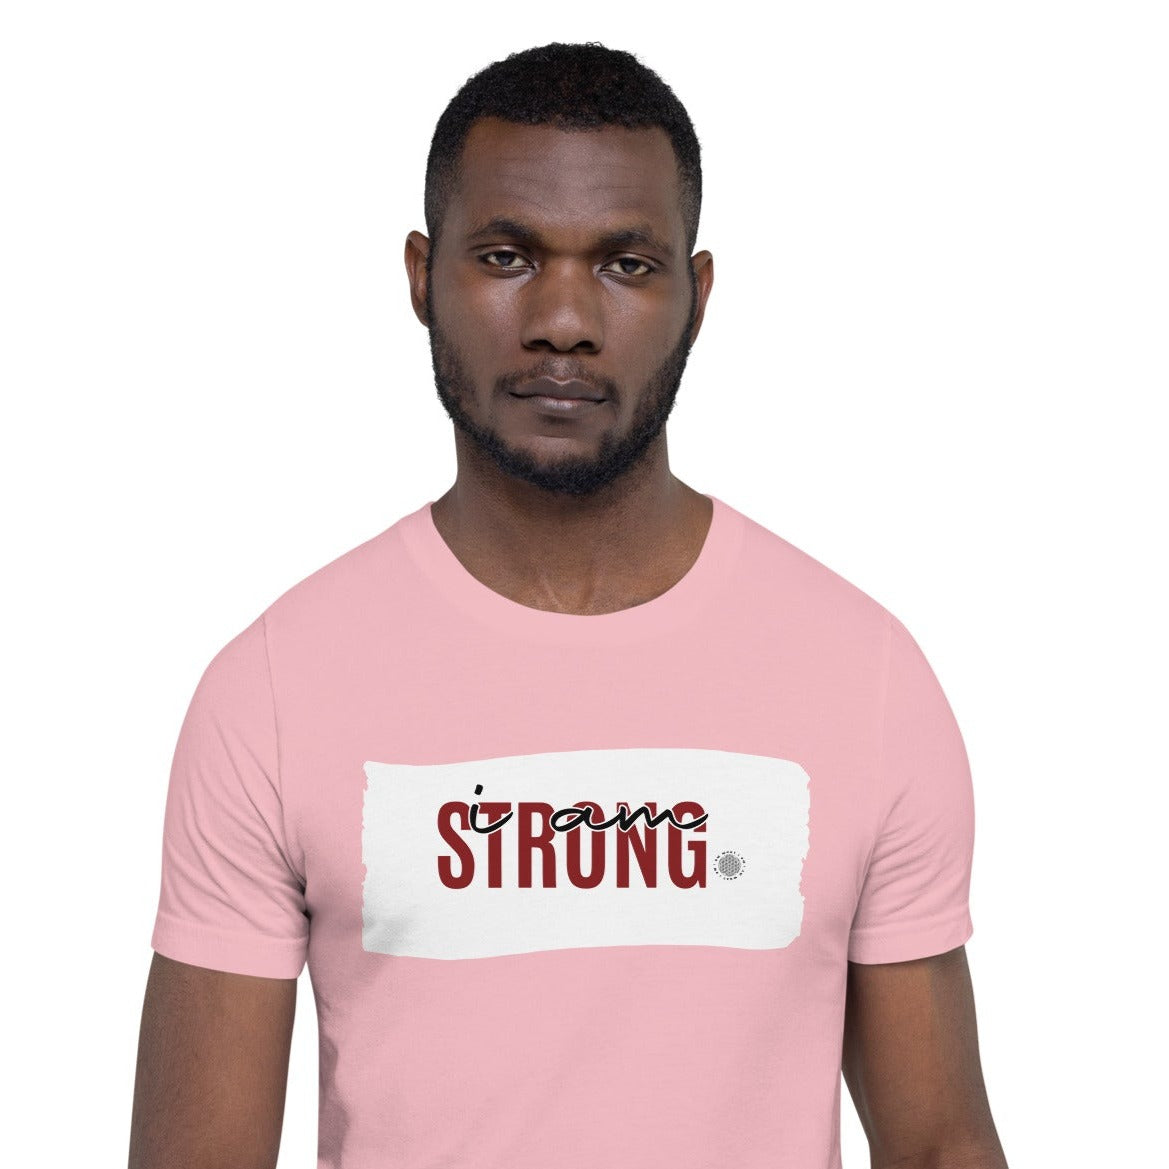 I Am Strong Adult Unisex T-Shirt pink